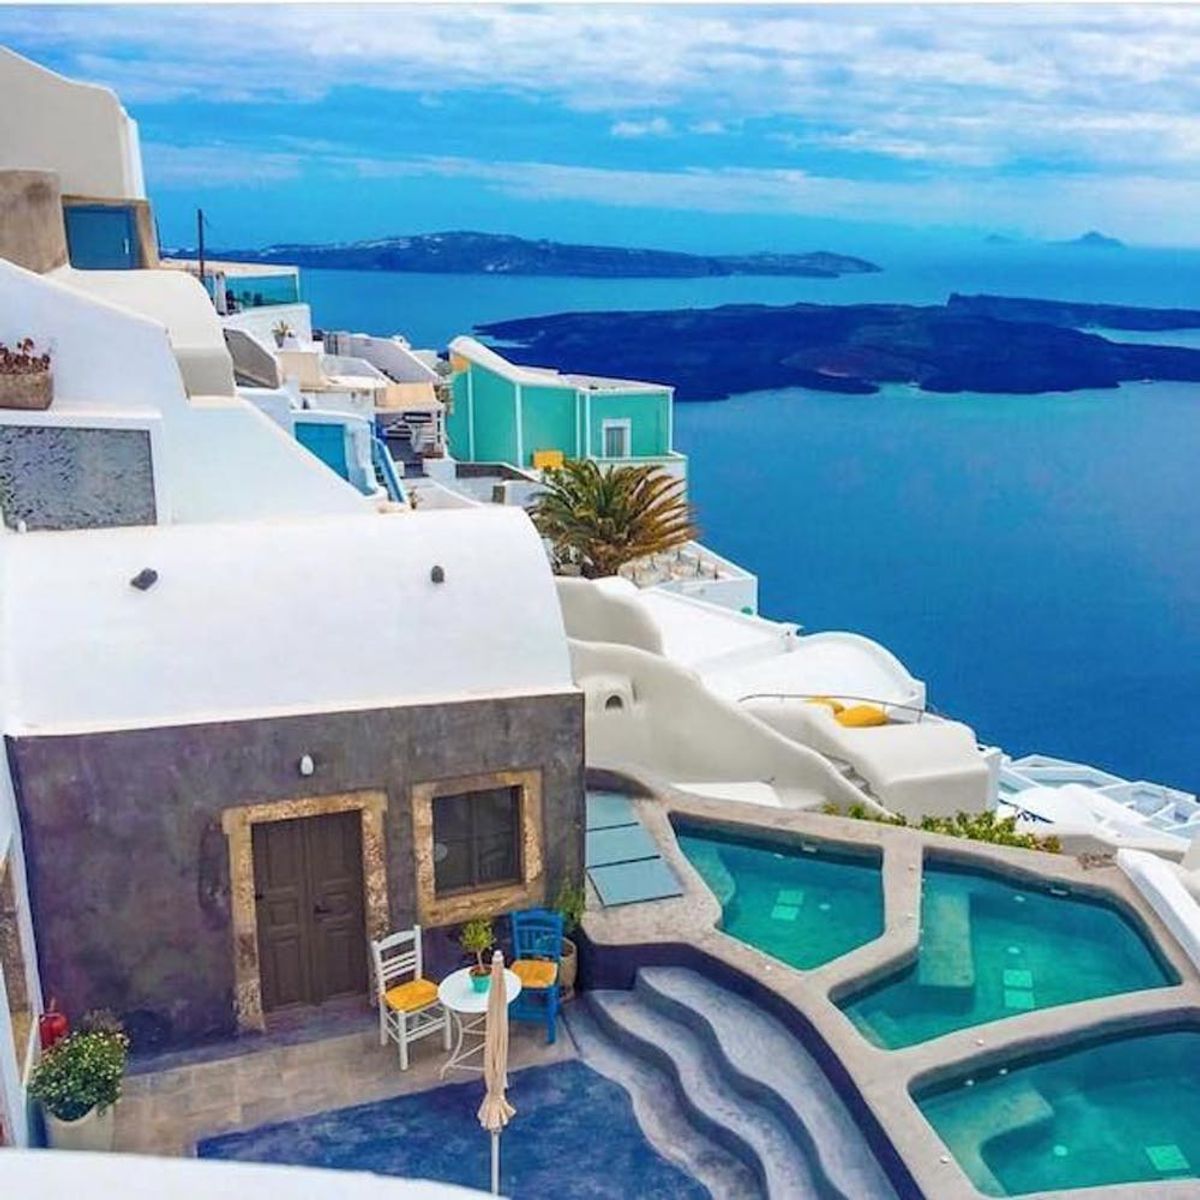 19 Insta-Worthy Summer Villas to Give You Serious #VacayEnvy